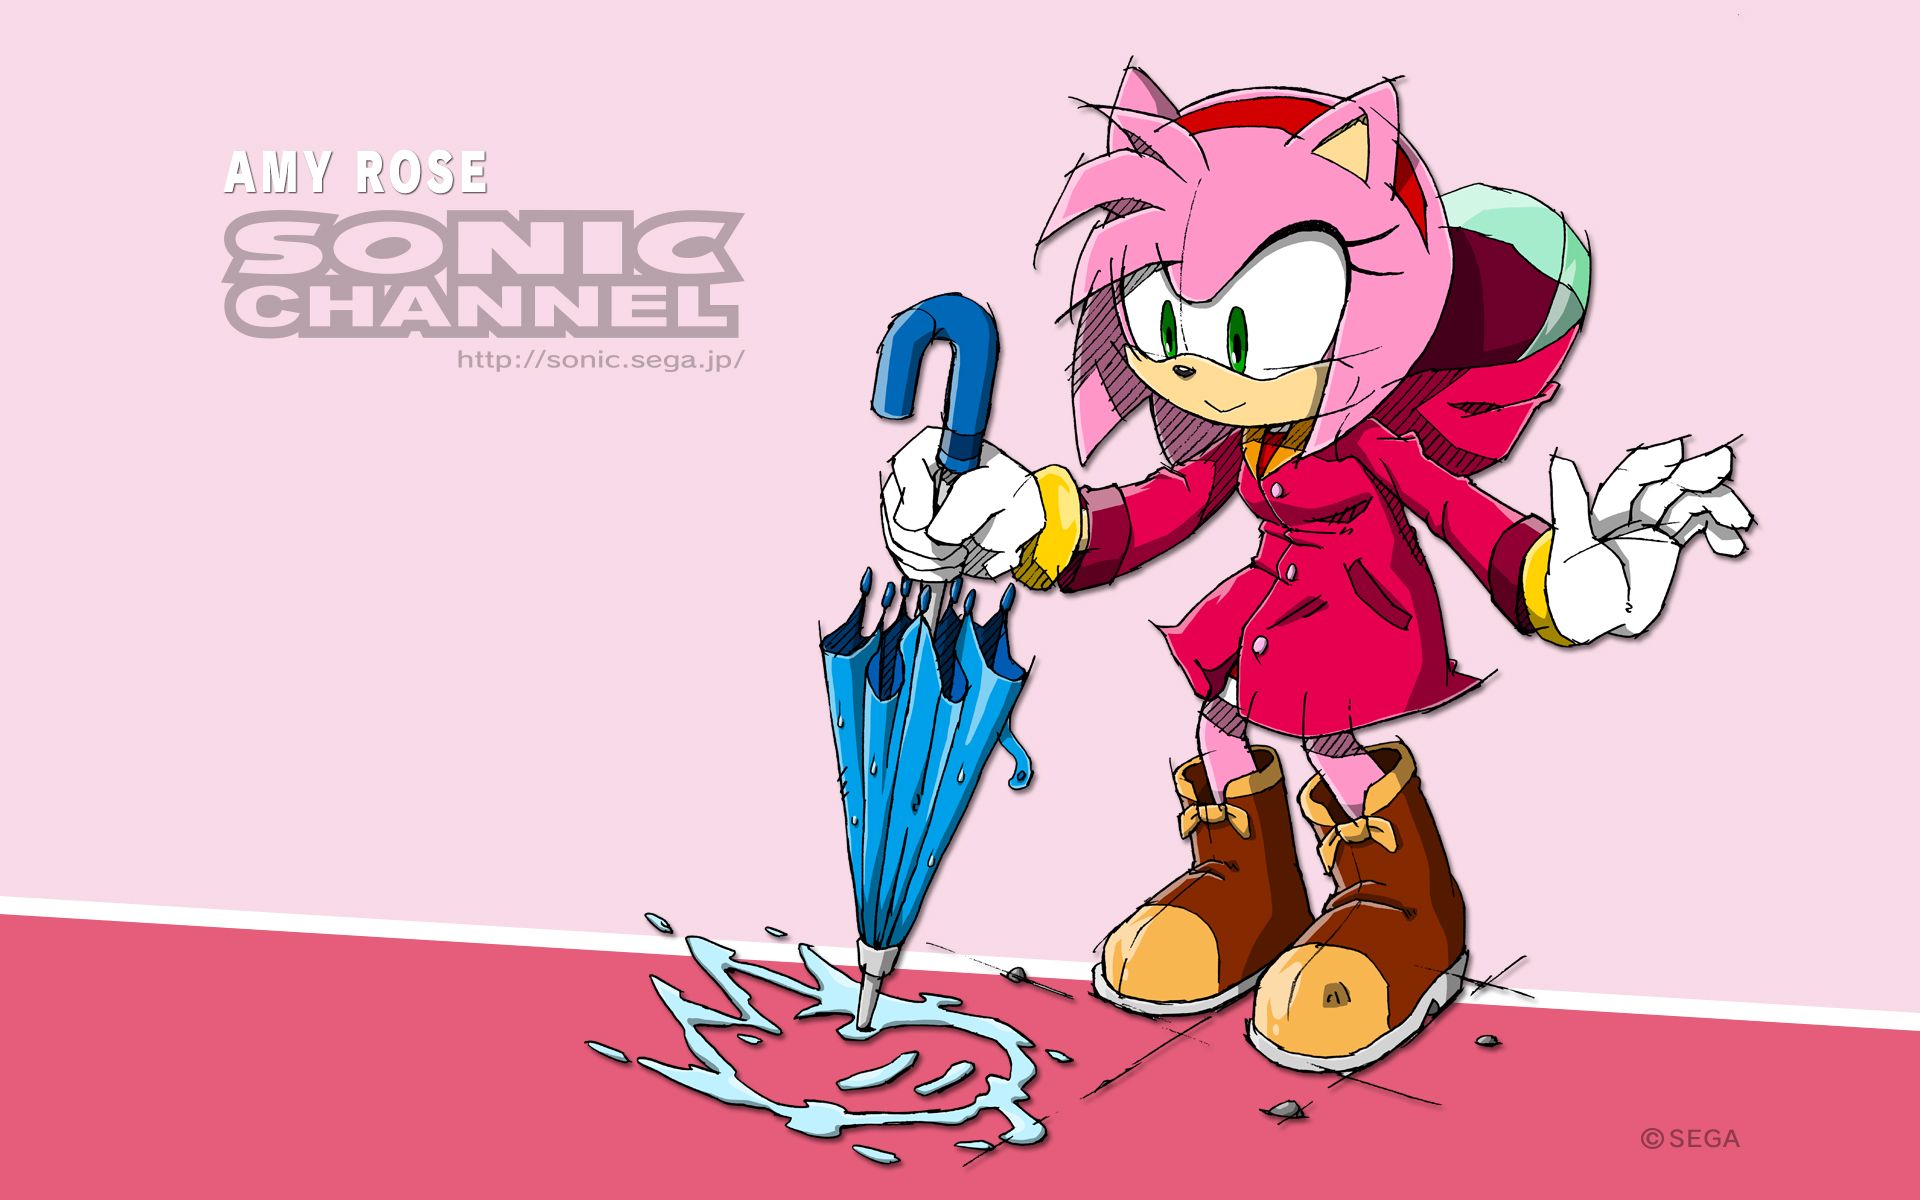 I just noticed that she's drawing Sonic's face with the rain